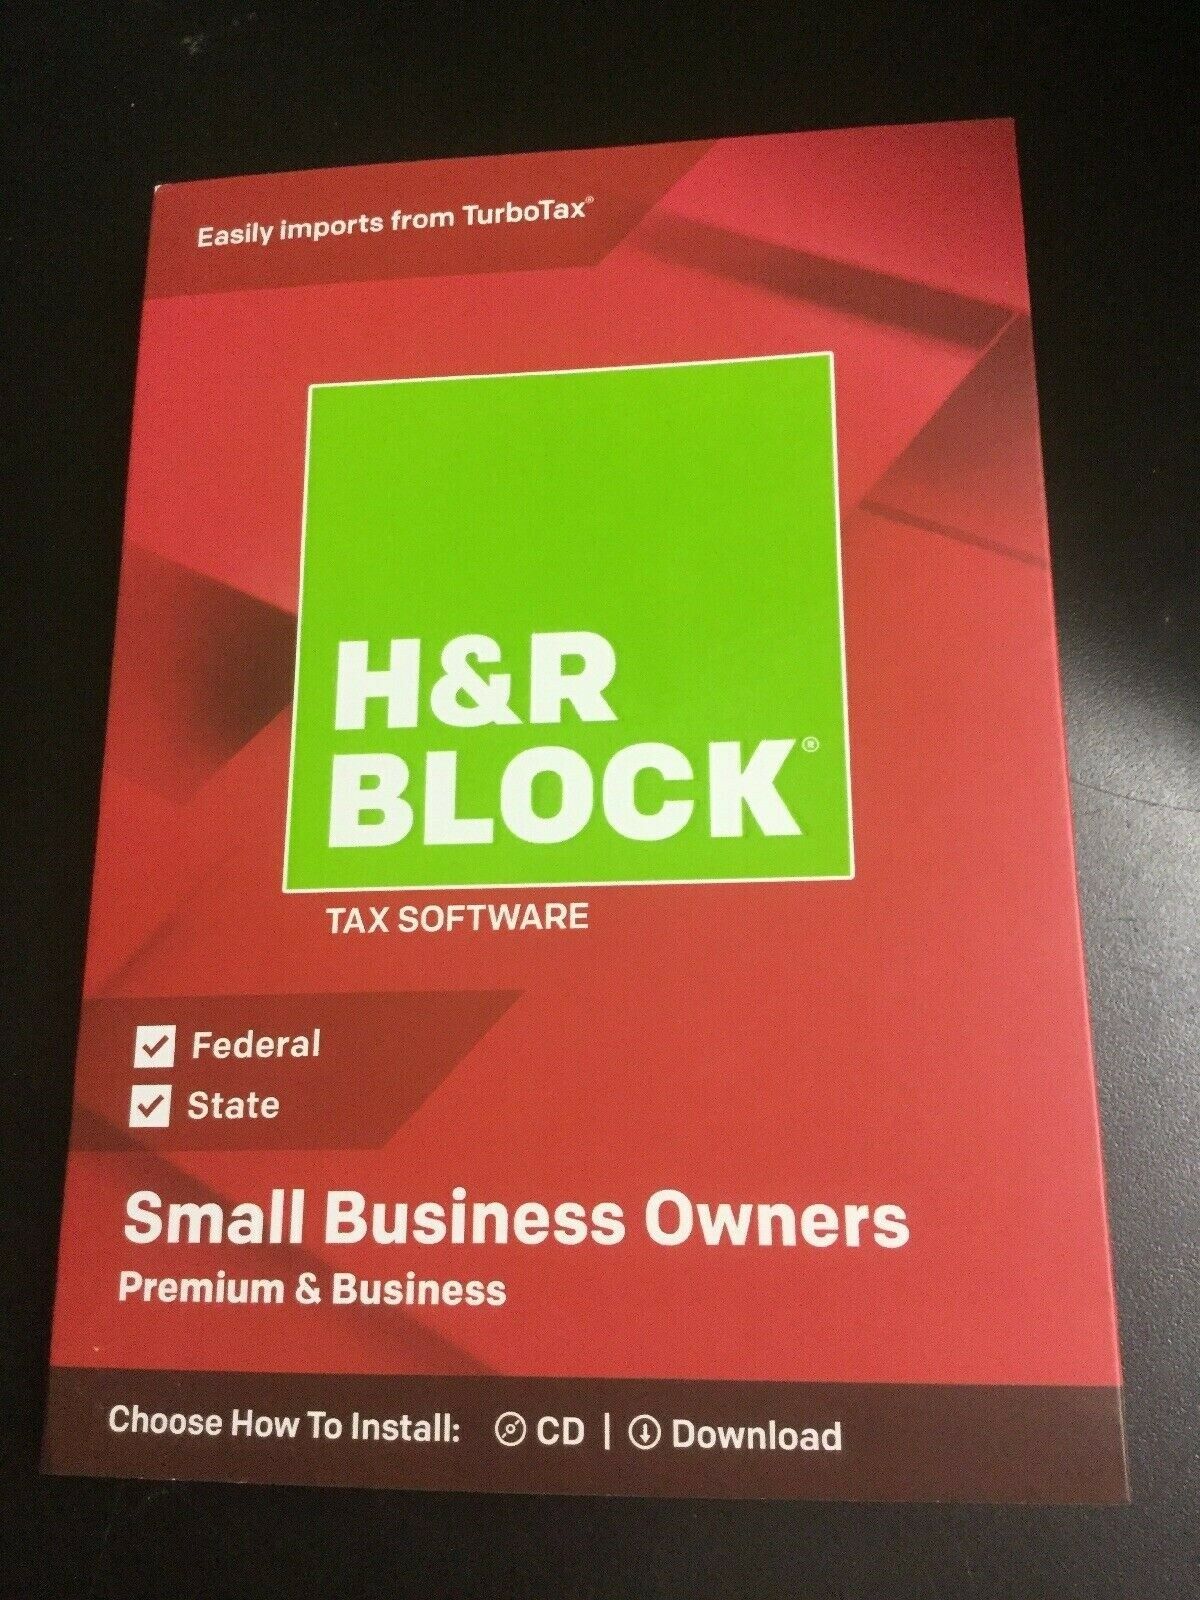 H&r Block Tax Software Premium & Business 2018 -small Business Owner Red #6414